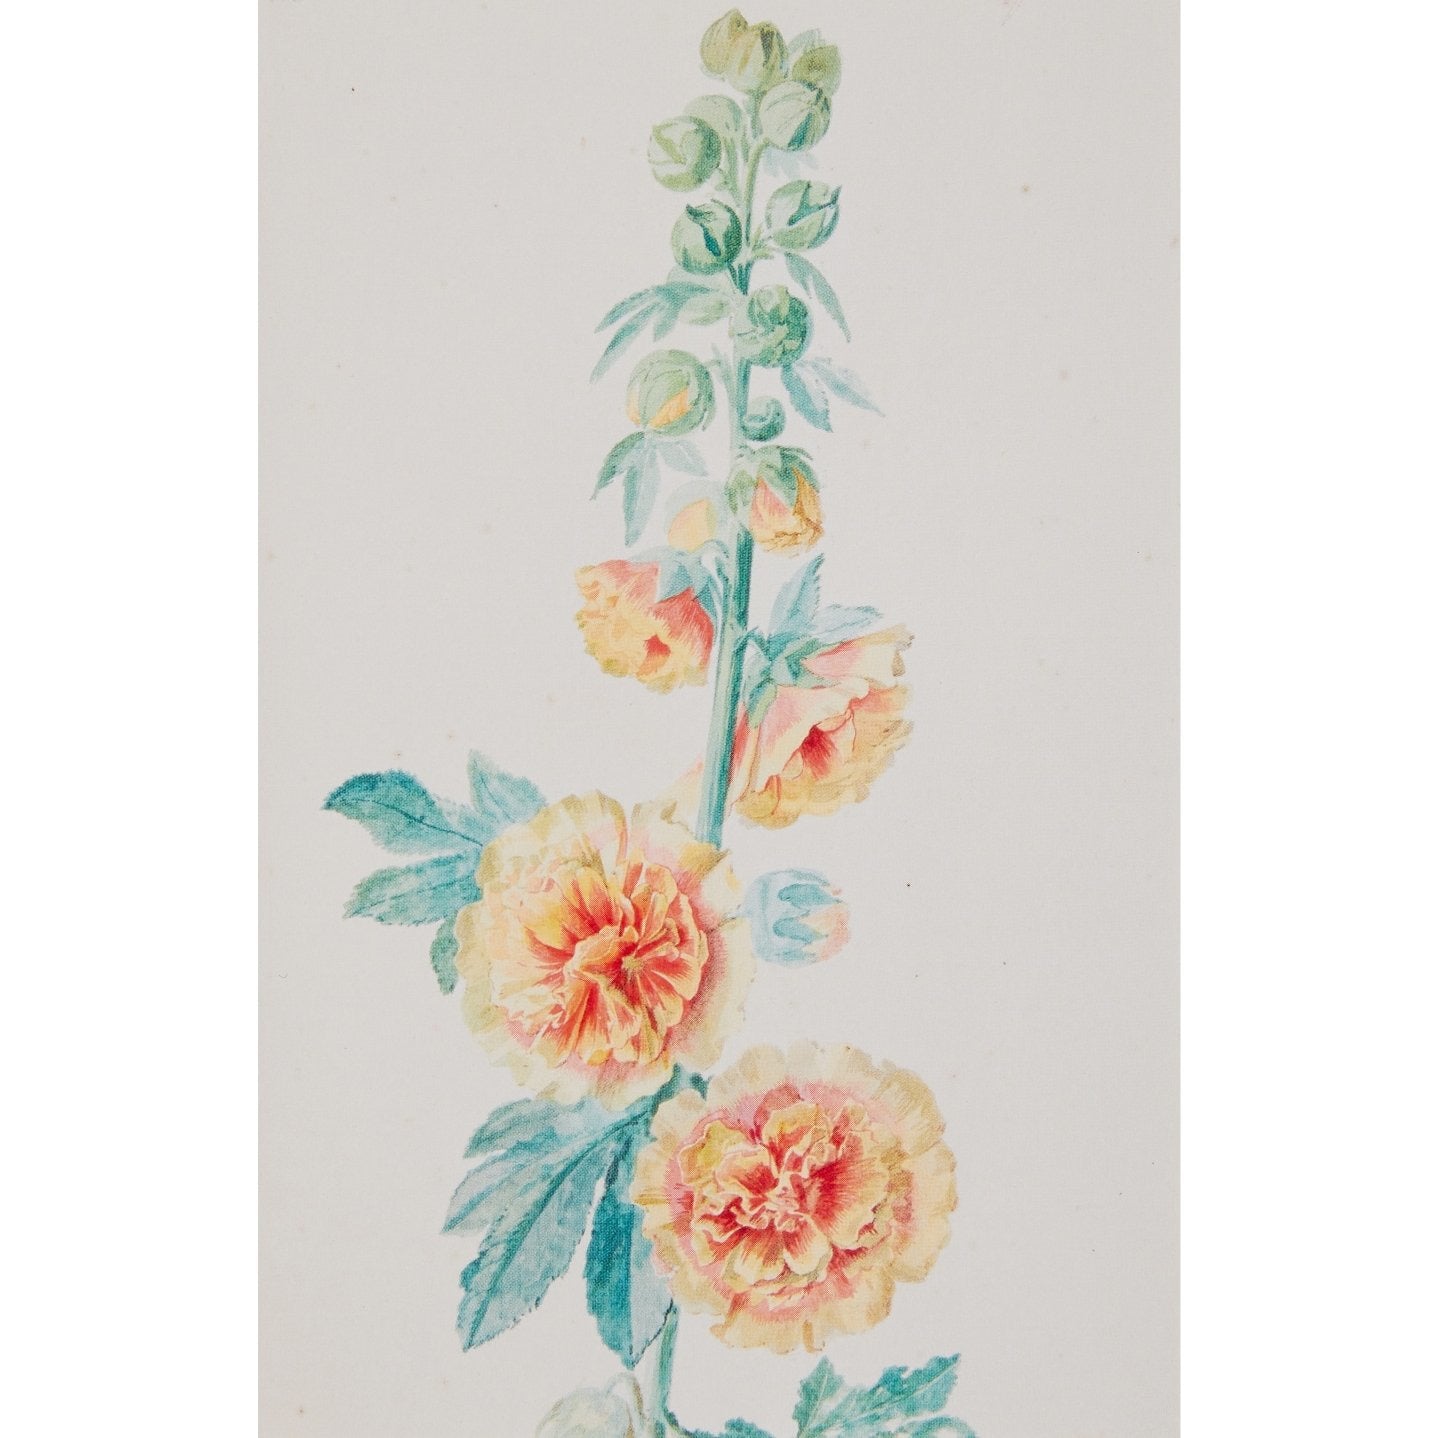 Notecard - Hollyhocks by Aert Schouman. From the Broughton Collection of the Fitzwilliam Museum, brought to you by CuratingCambridge.co.uk